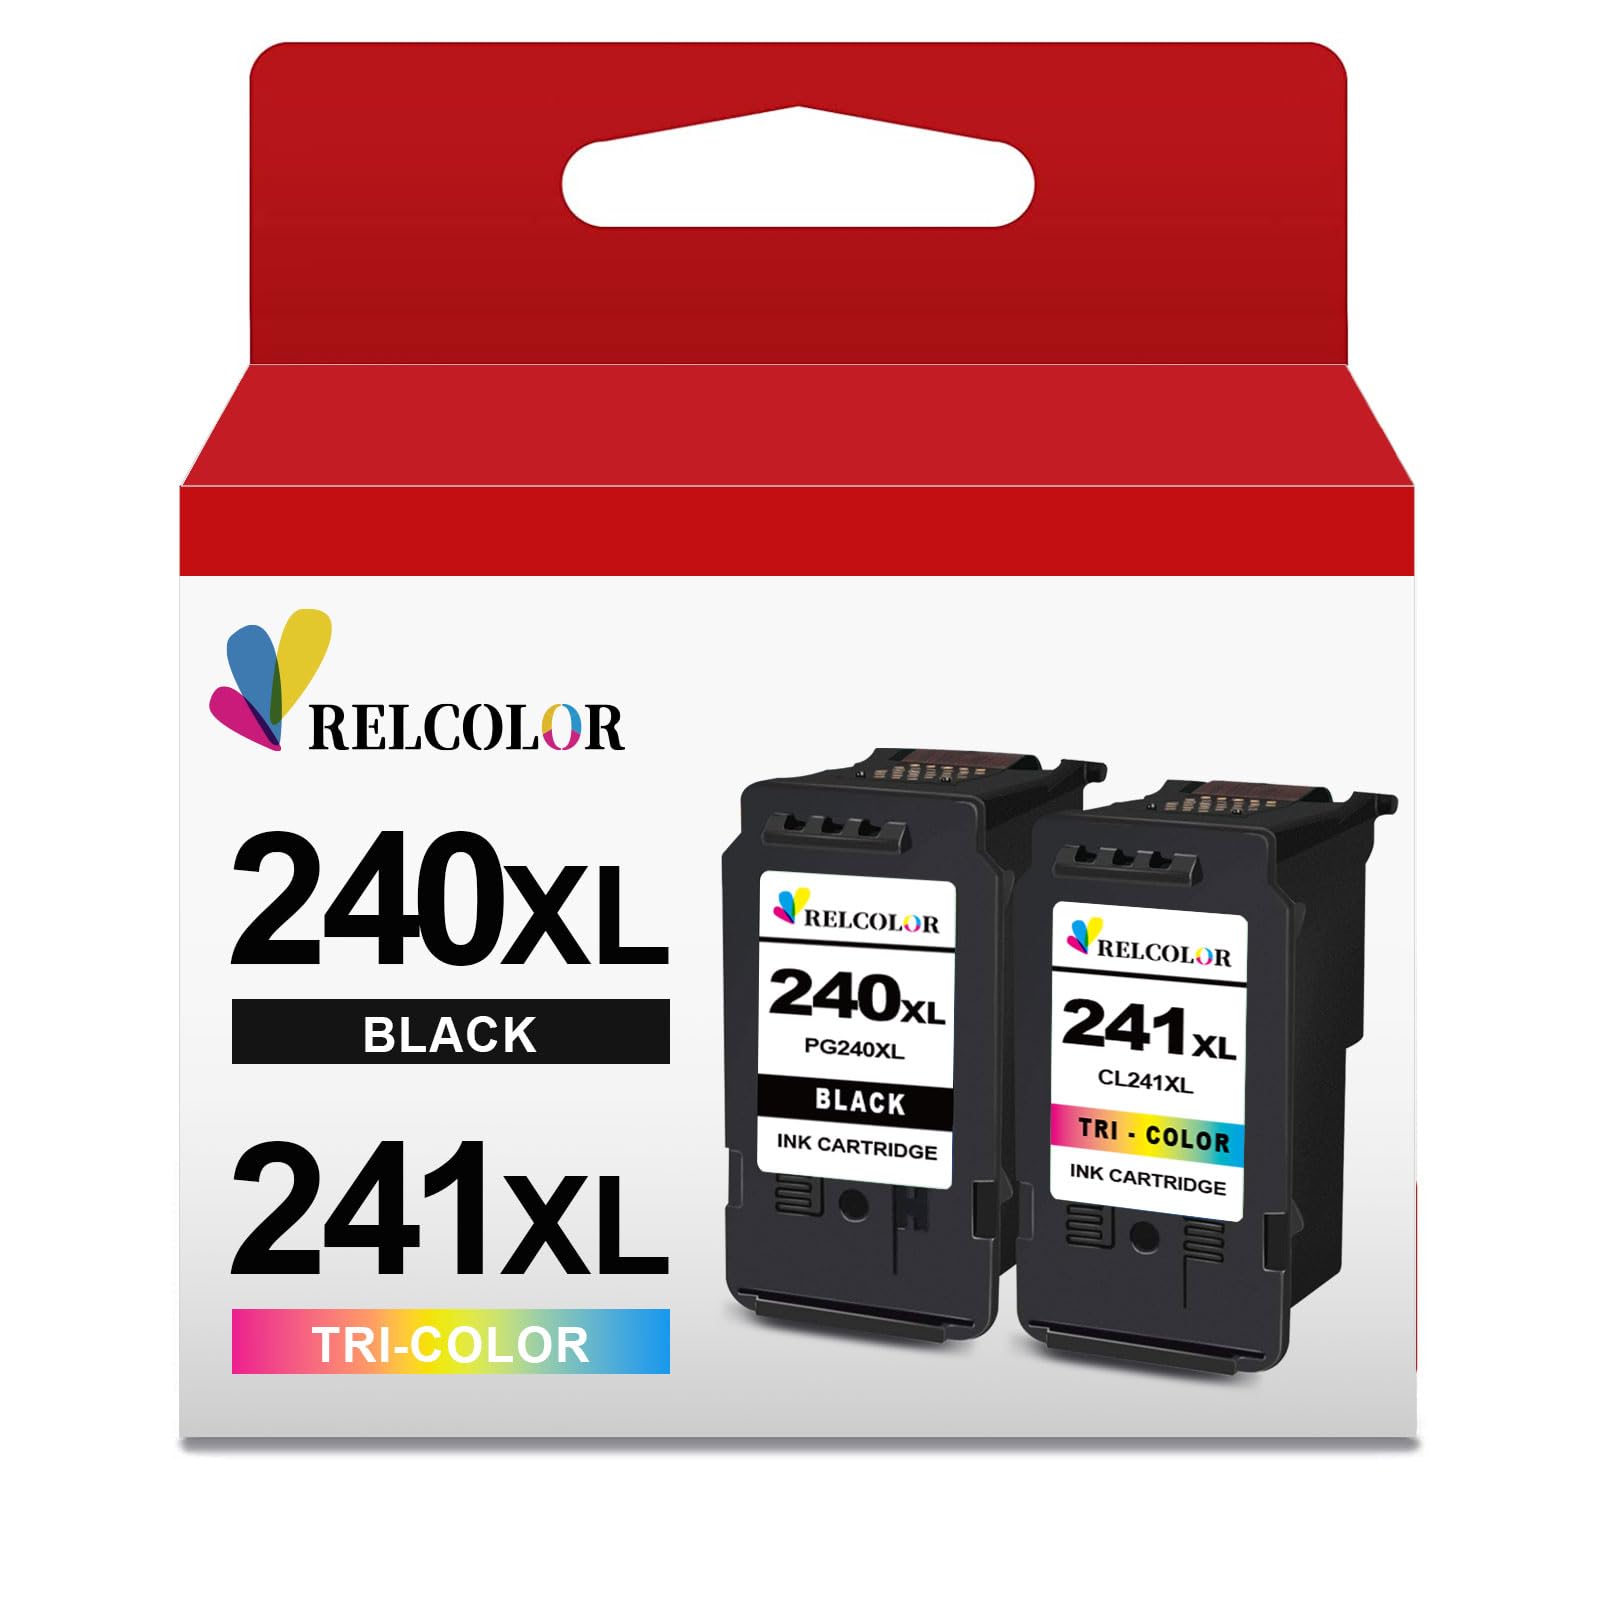 Relcolor 2X Capacity 240XL 241XL Ink Cartridges Black Color Combo Pack for Canon PG-240 CL-241 XL PG240 CL241 for Cannon Pixma MG3620 MG3600 TS5120 TS5100 MG3520 MG2120 MX452 MX532 MX472 MX512 Printer